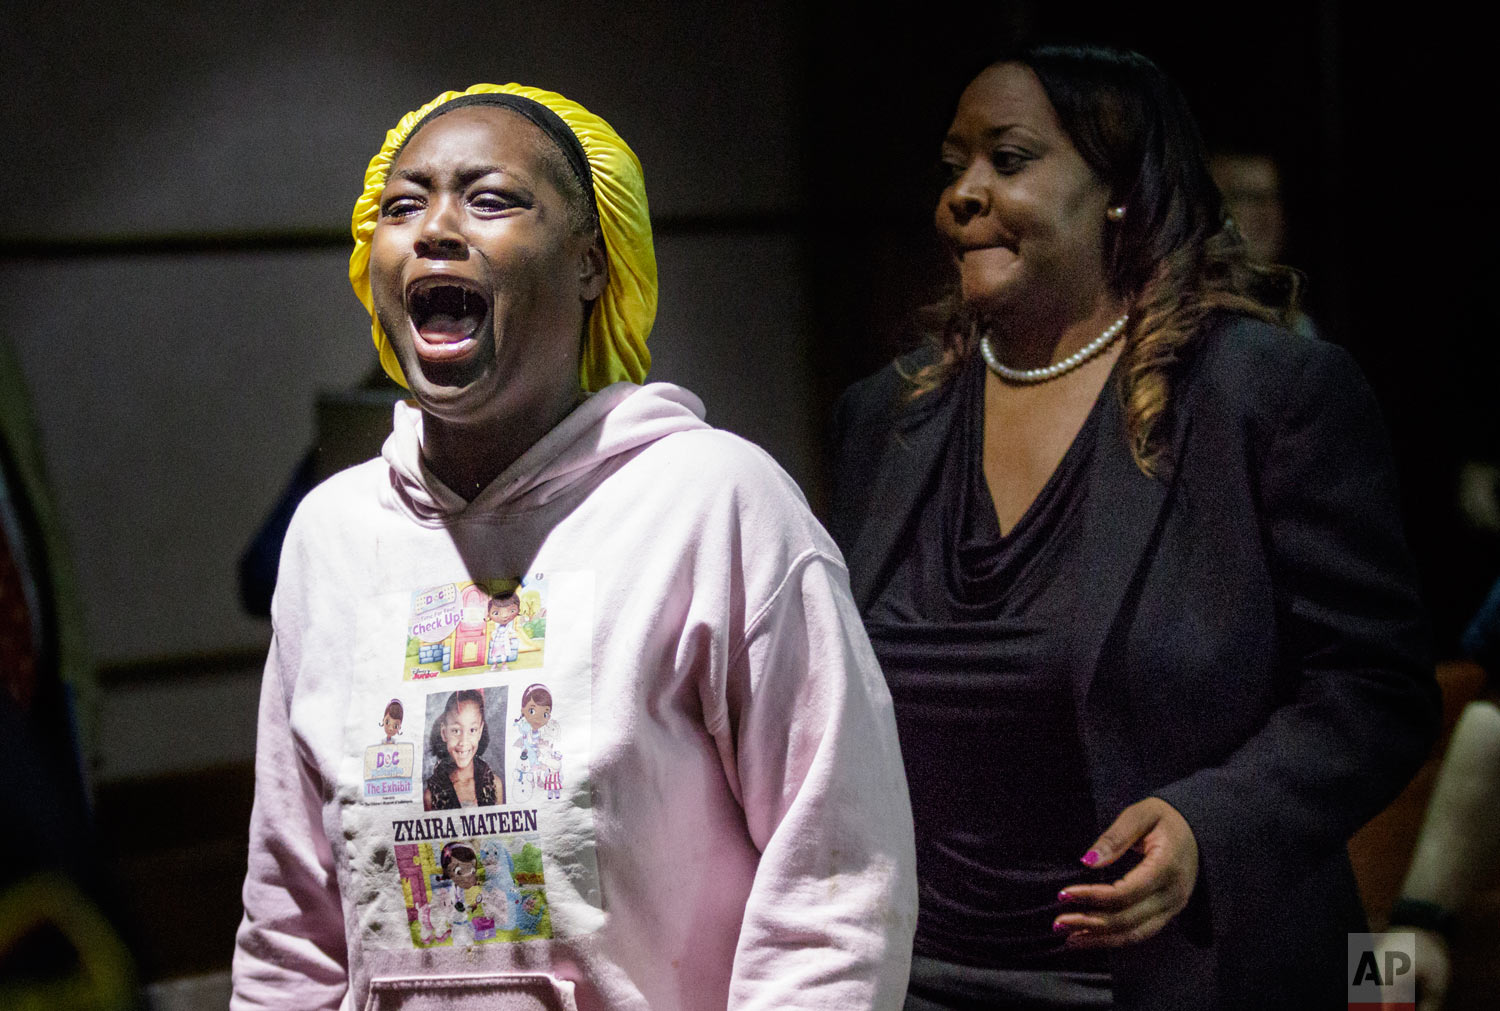  Jasmine Mateen, mother of bus crash victim Zyaira Mateen, shouts as she is escorted from the courtroom during a sentencing hearing for Woodmore bus driver Johnthony Walker in Judge Don Poole's courtroom at the Chattanooga-Hamilton County Courts Buil